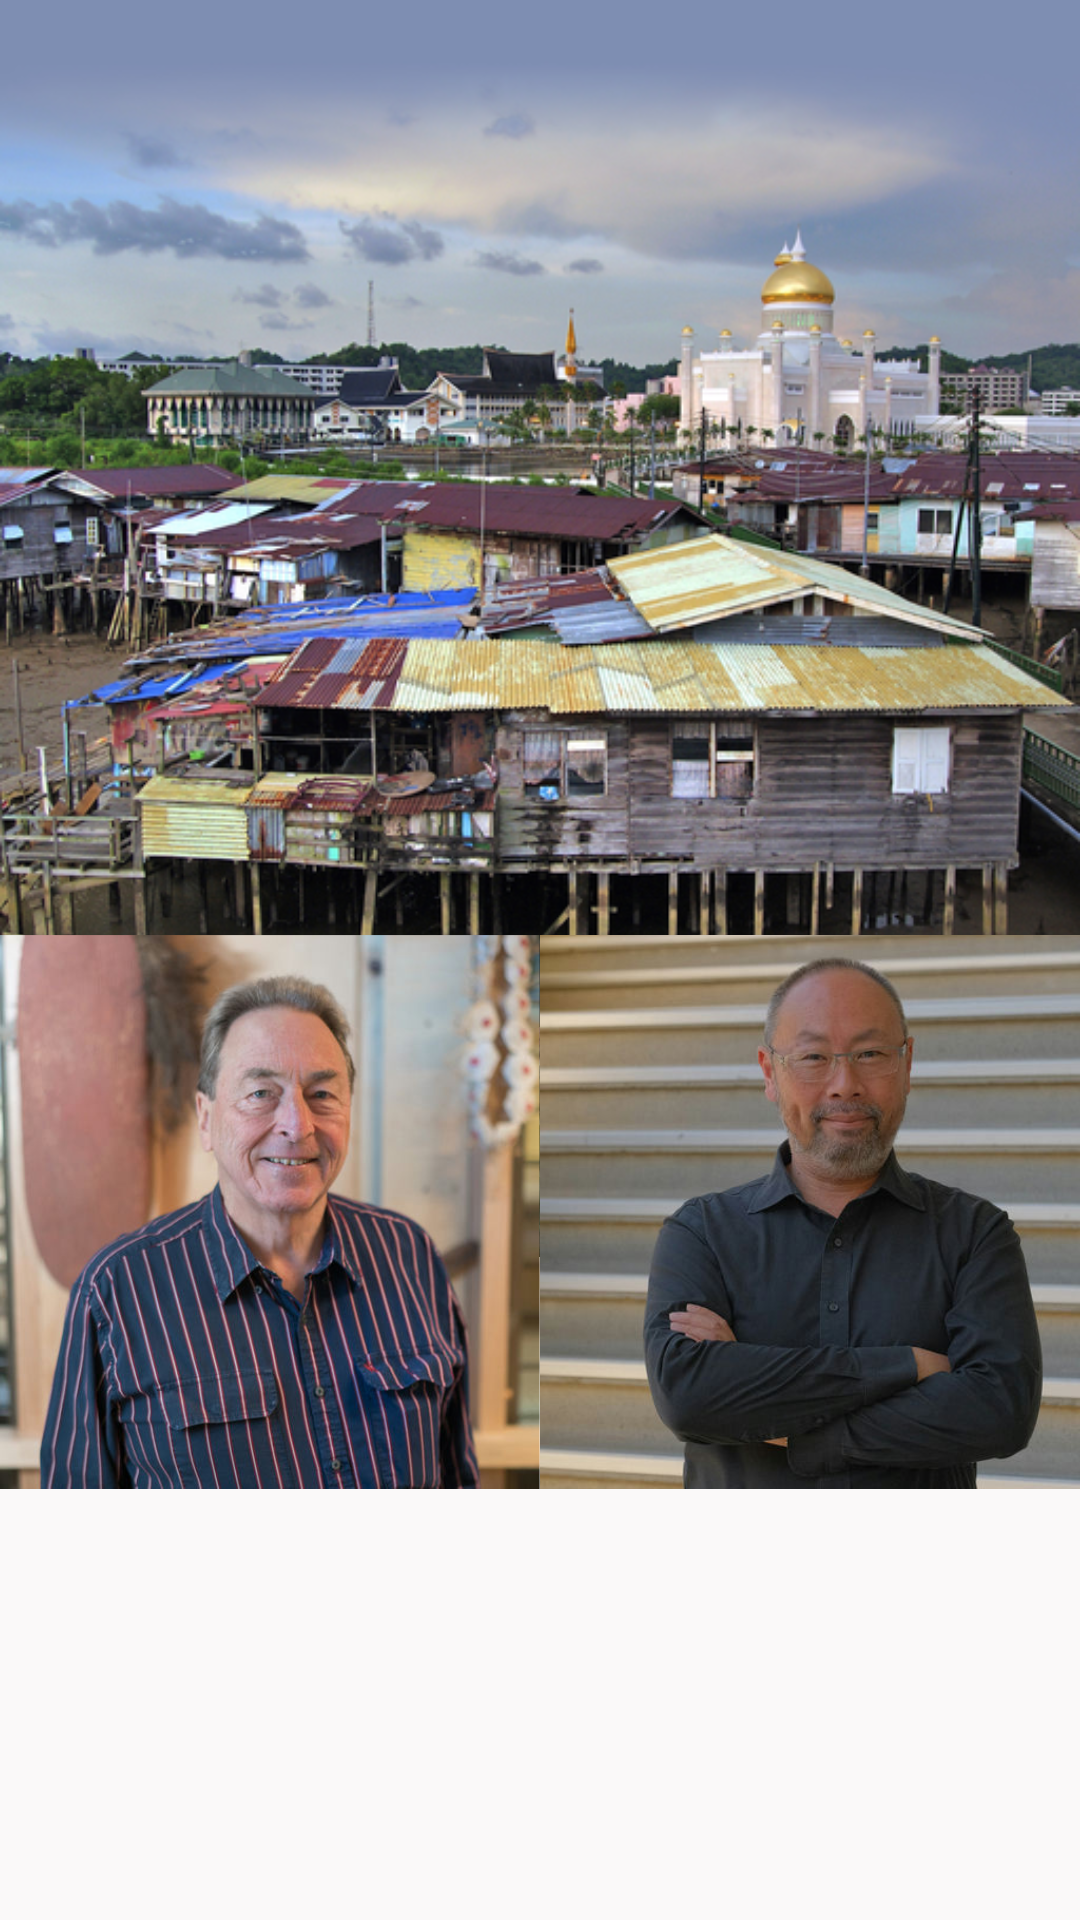 The two authors left: Paul Memmott AM, right: John Ting beneath the image of a stilt house above water they use as the cover for their new book.